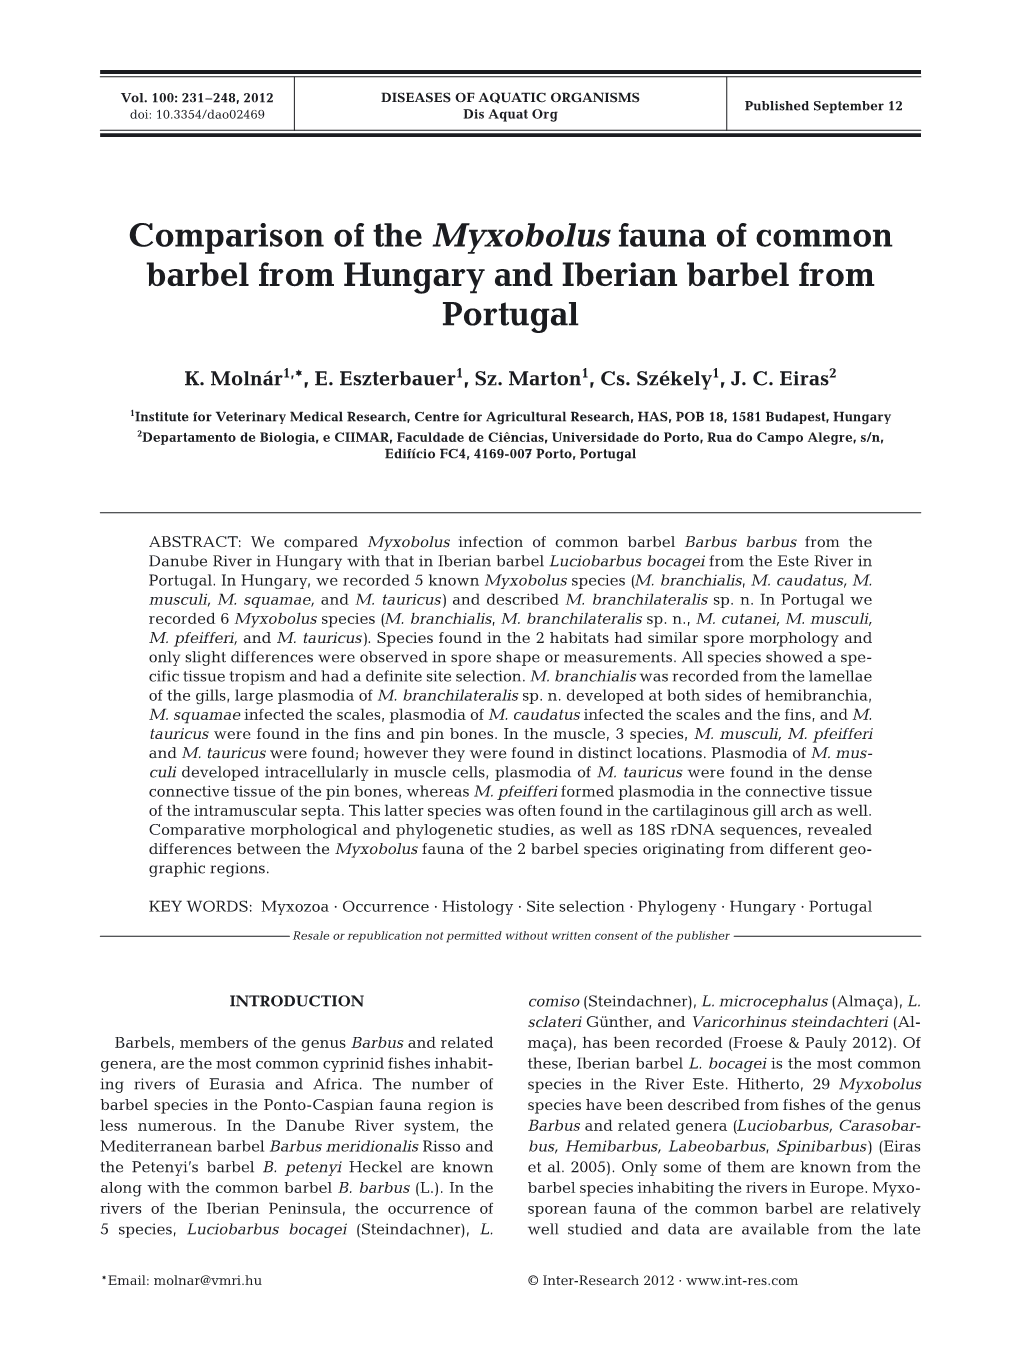 Comparison of the Myxobolus Fauna of Common Barbel from Hungary and Iberian Barbel from Portugal